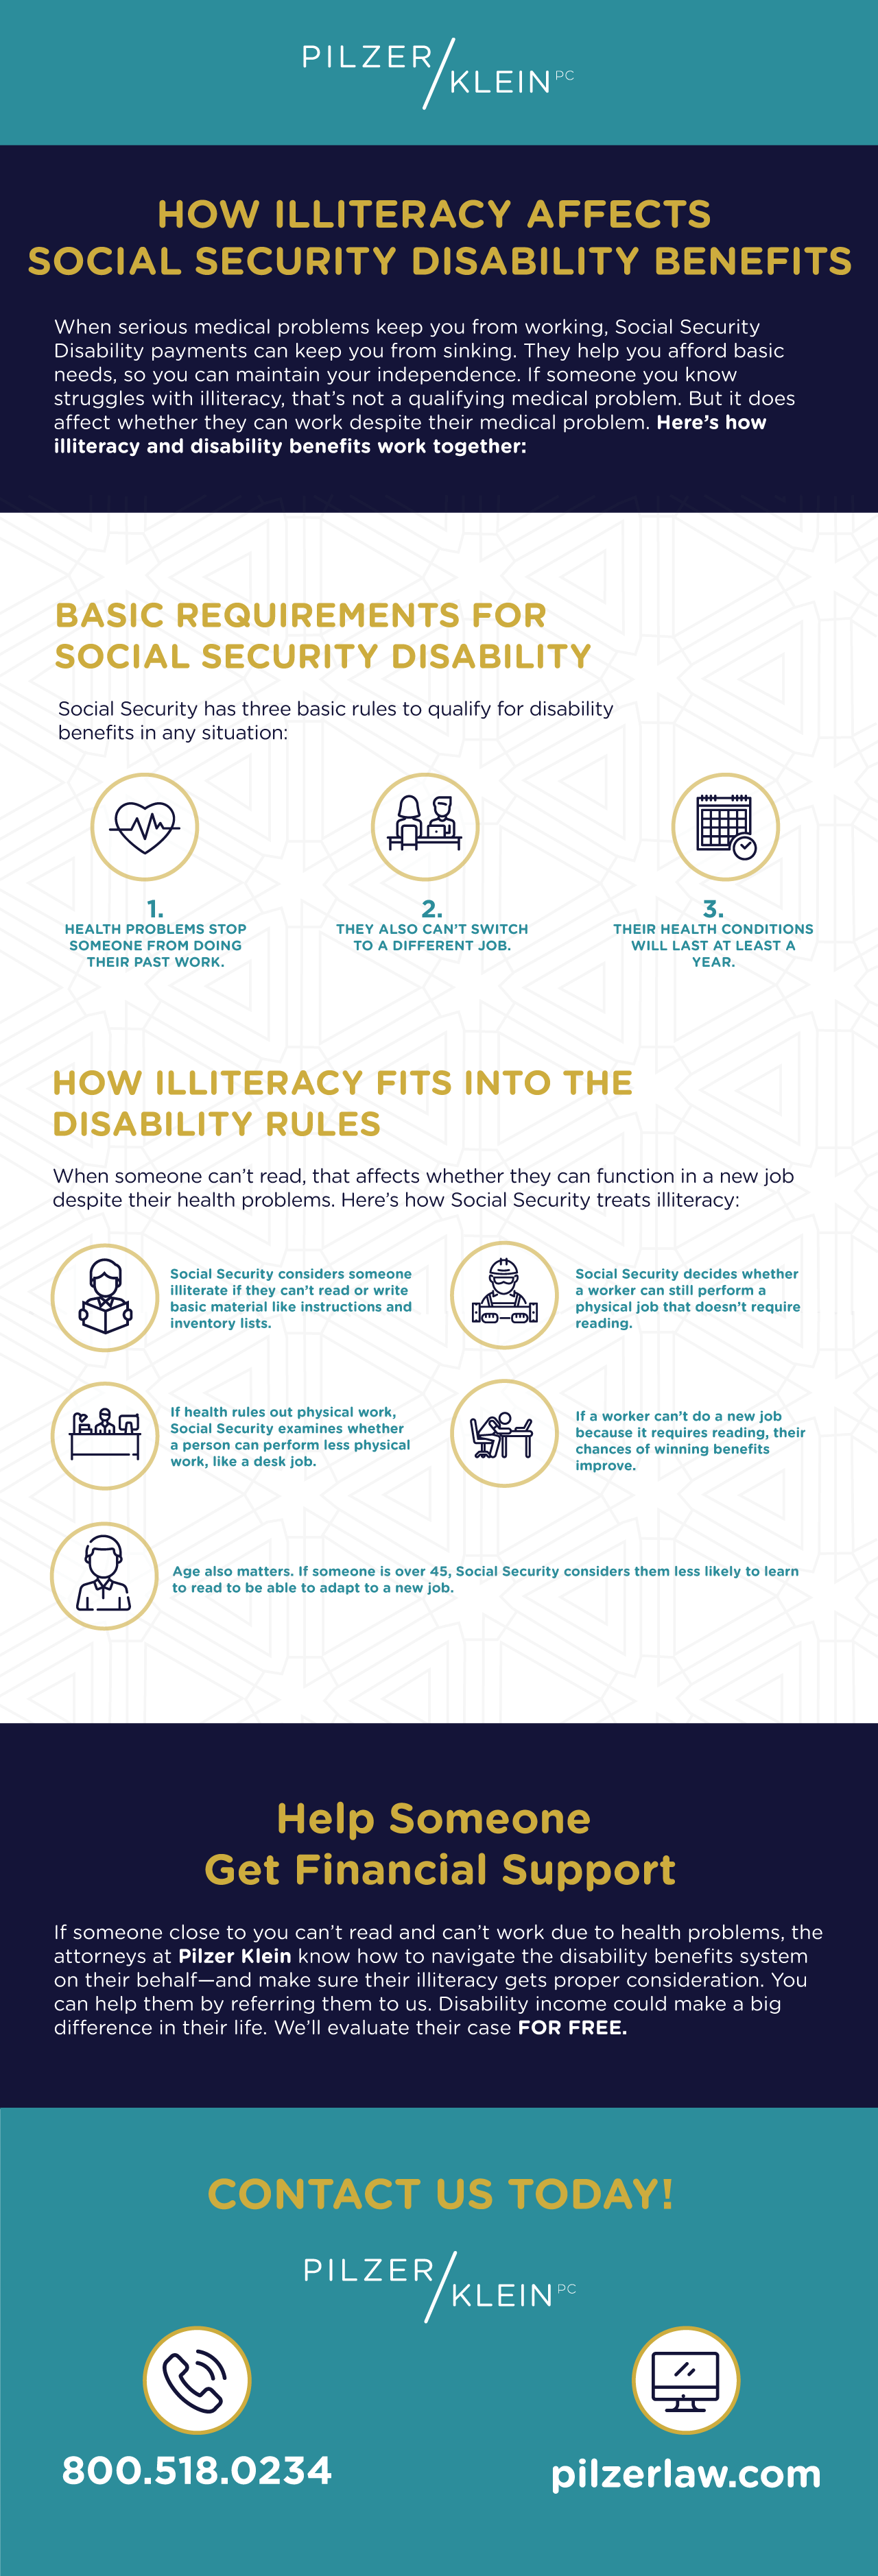 Infographic - how illiteracy affects social security disability benefits